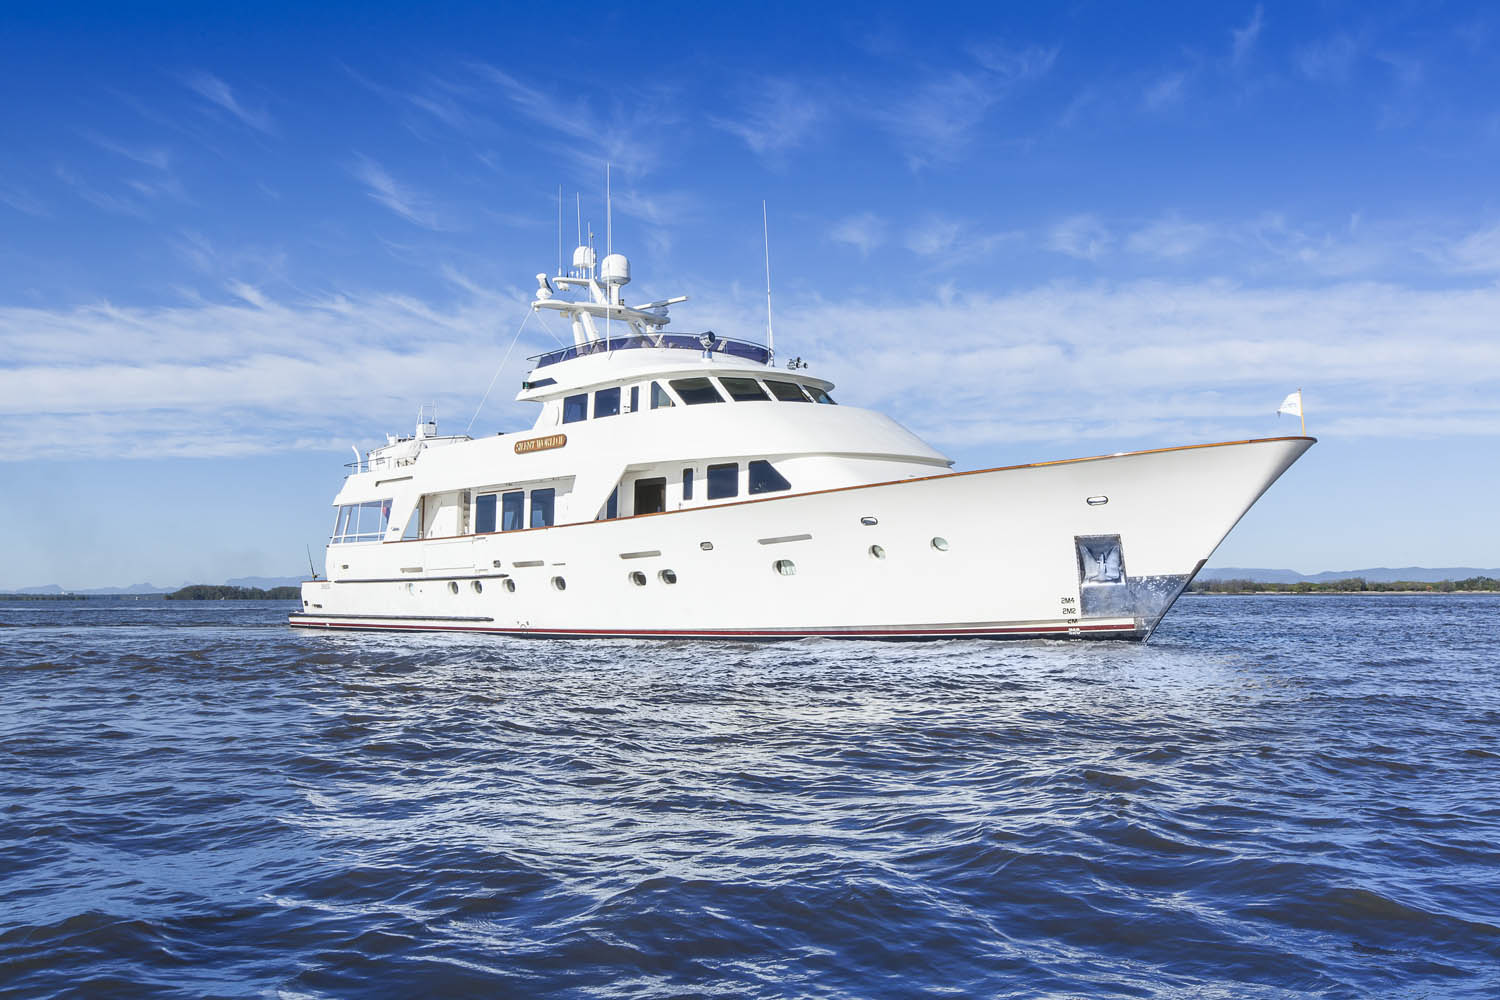 M/Y SILENT WORLD II yacht for sale exterior view